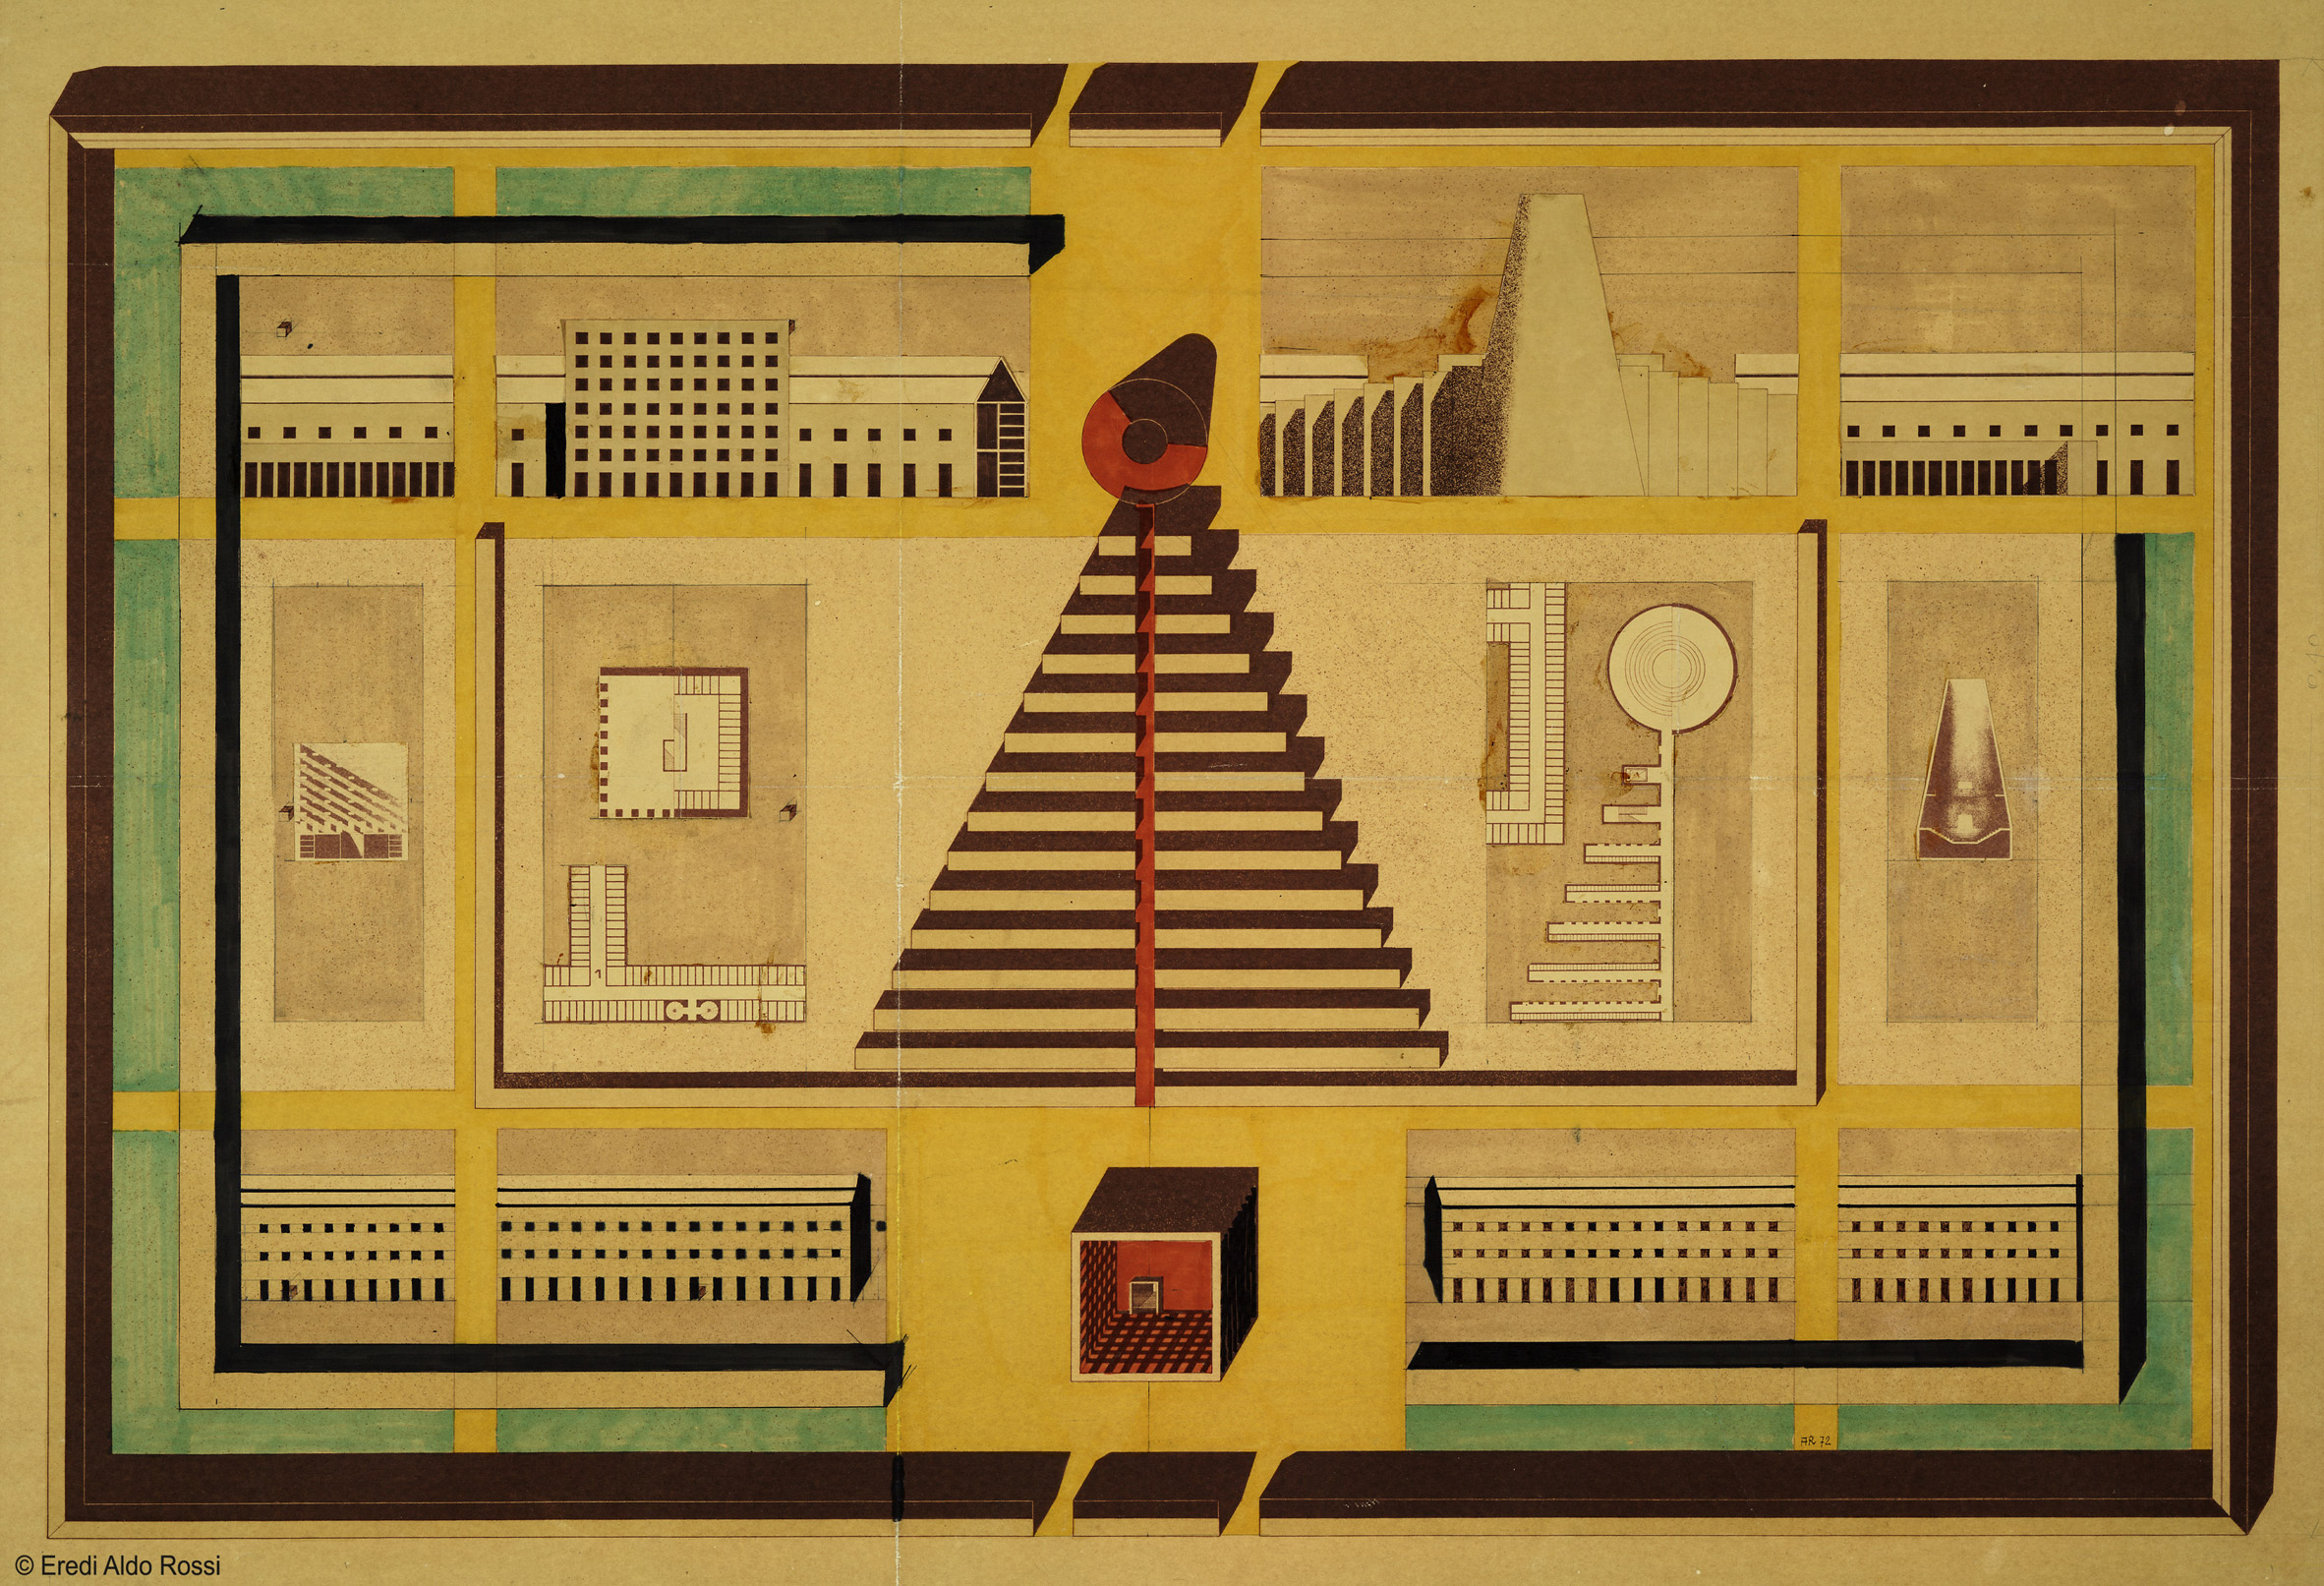 Profeti hed bede Ten key Aldo Rossi projects that showcase the scope of his work